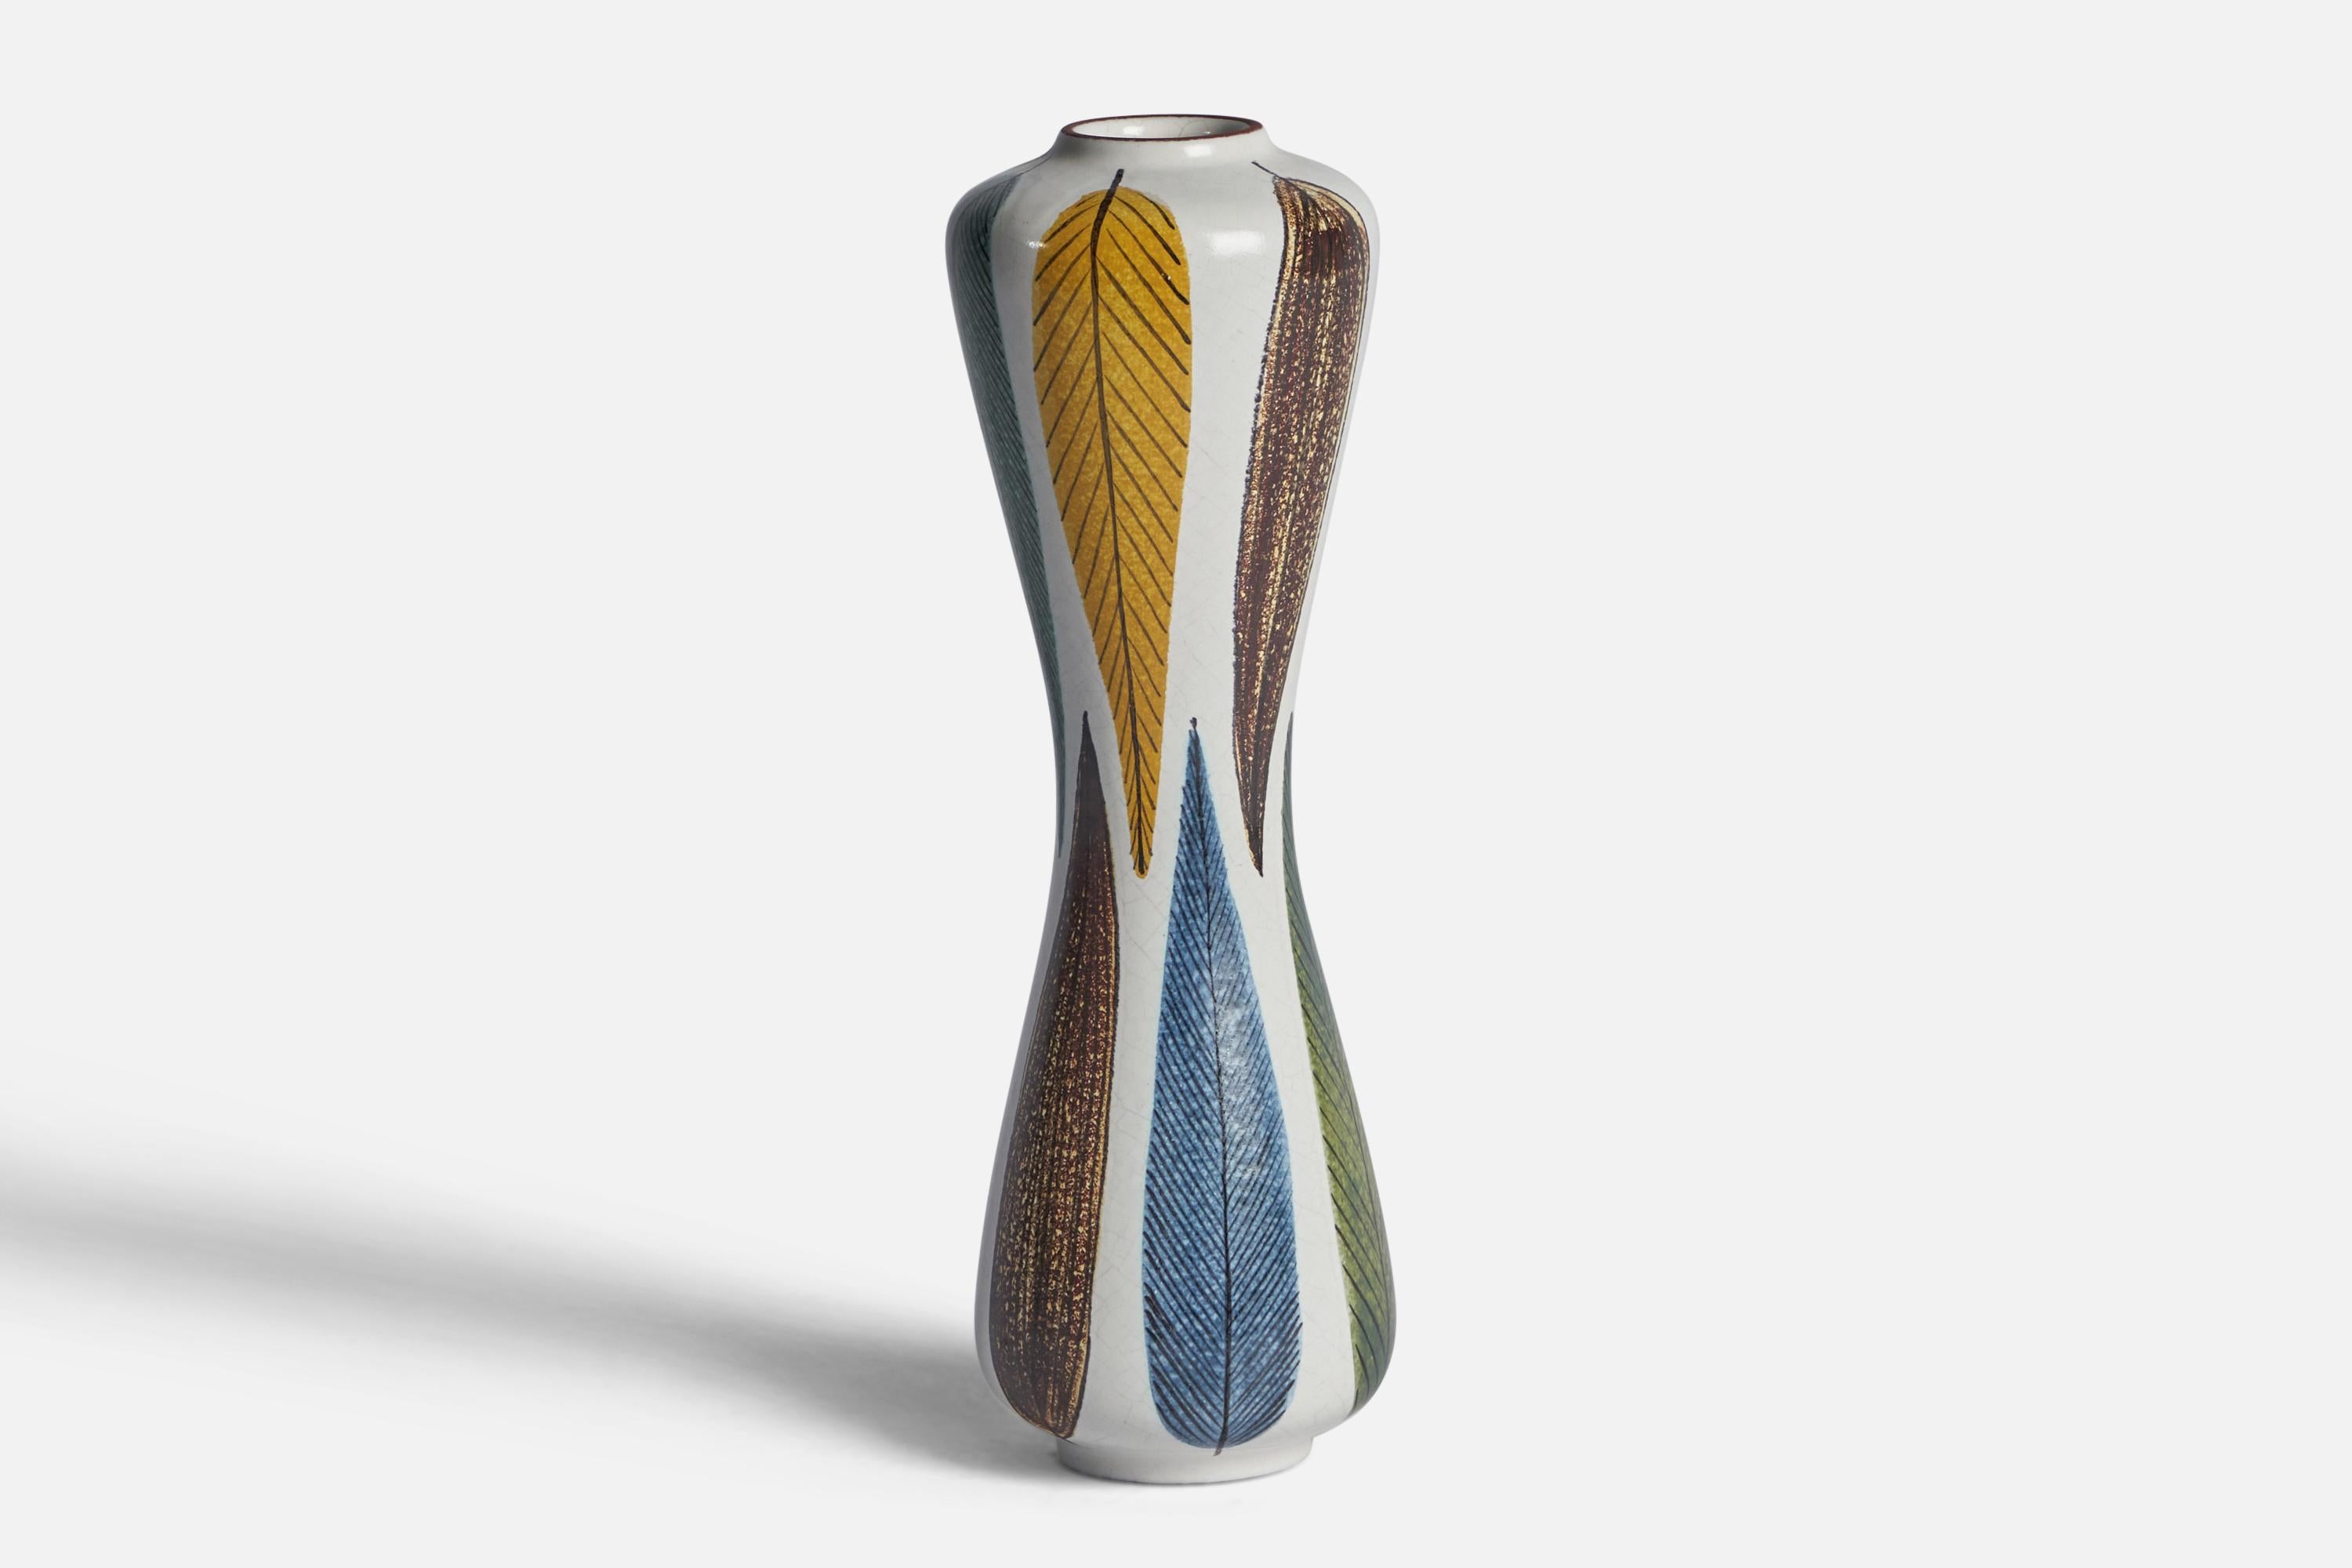 A multicoloured stoneware vase designed by Stig Lindberg and produced by Gustavsberg, Sweden, c. 1960s.
